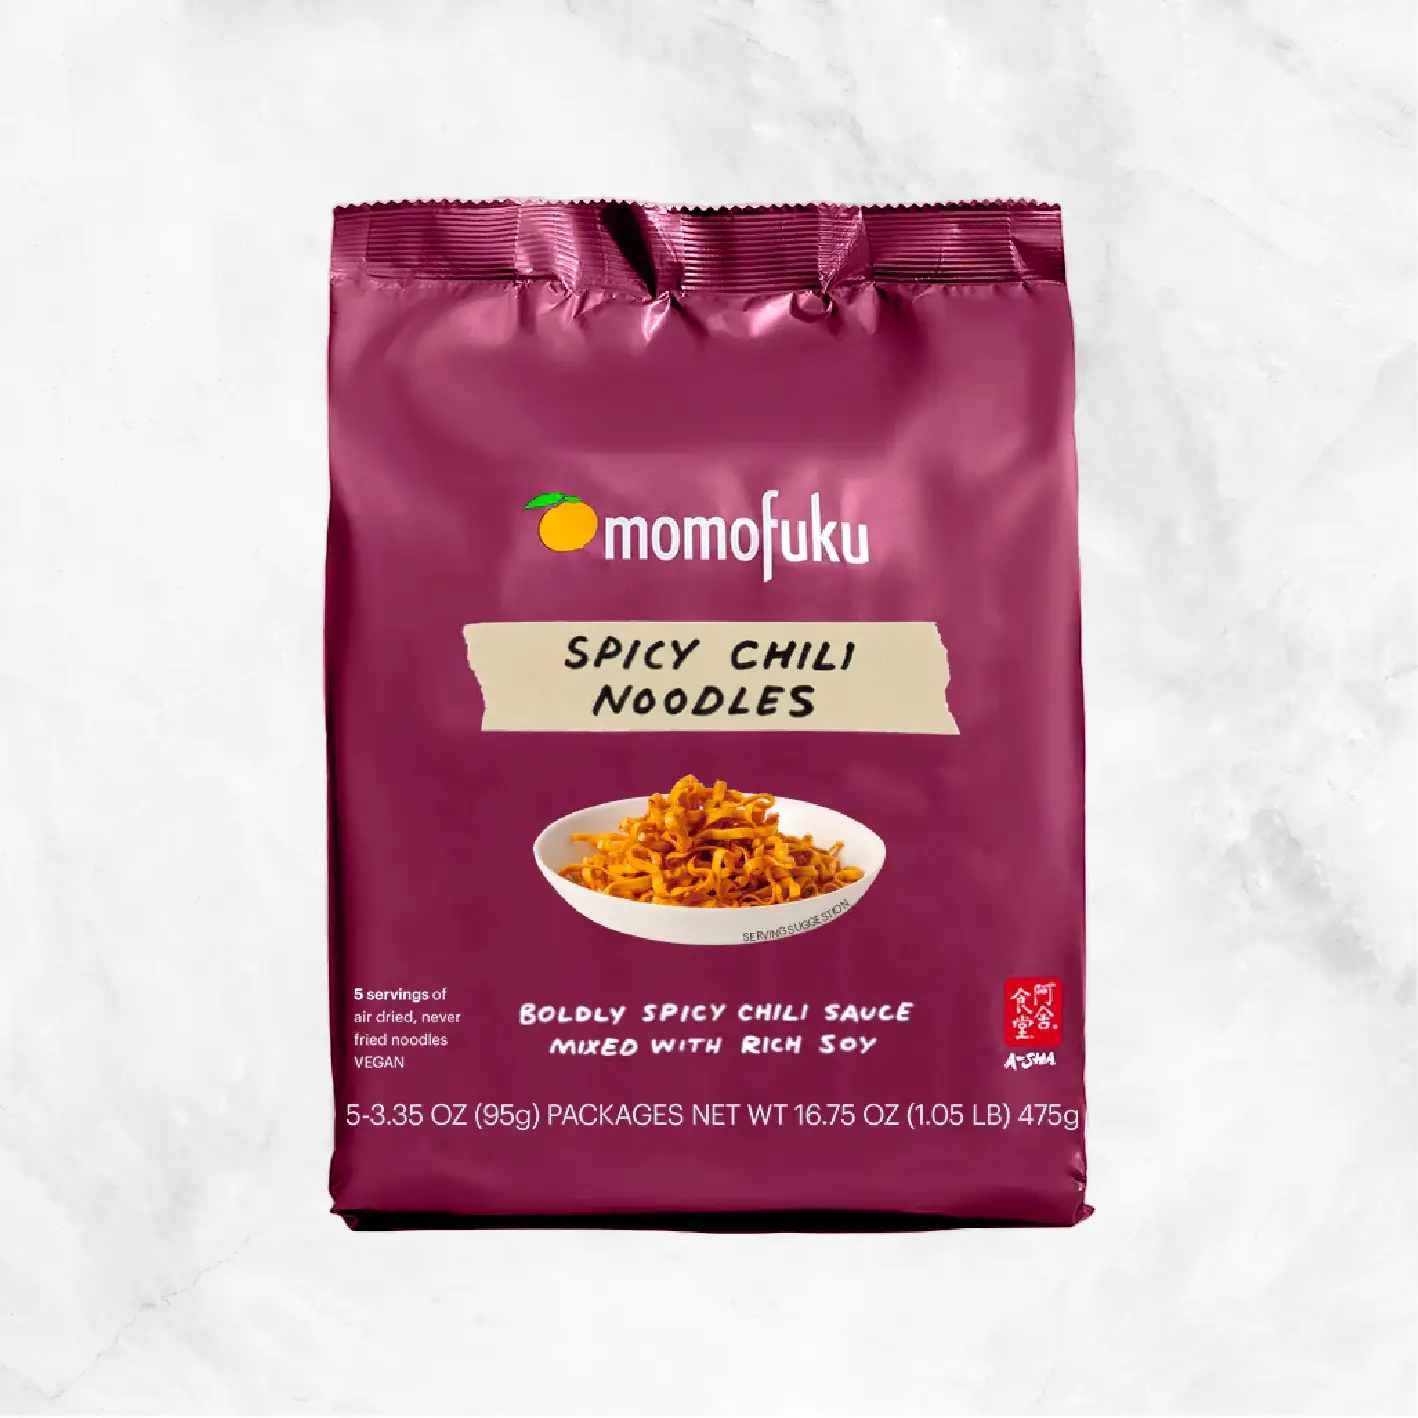 Spicy Chili Noodles